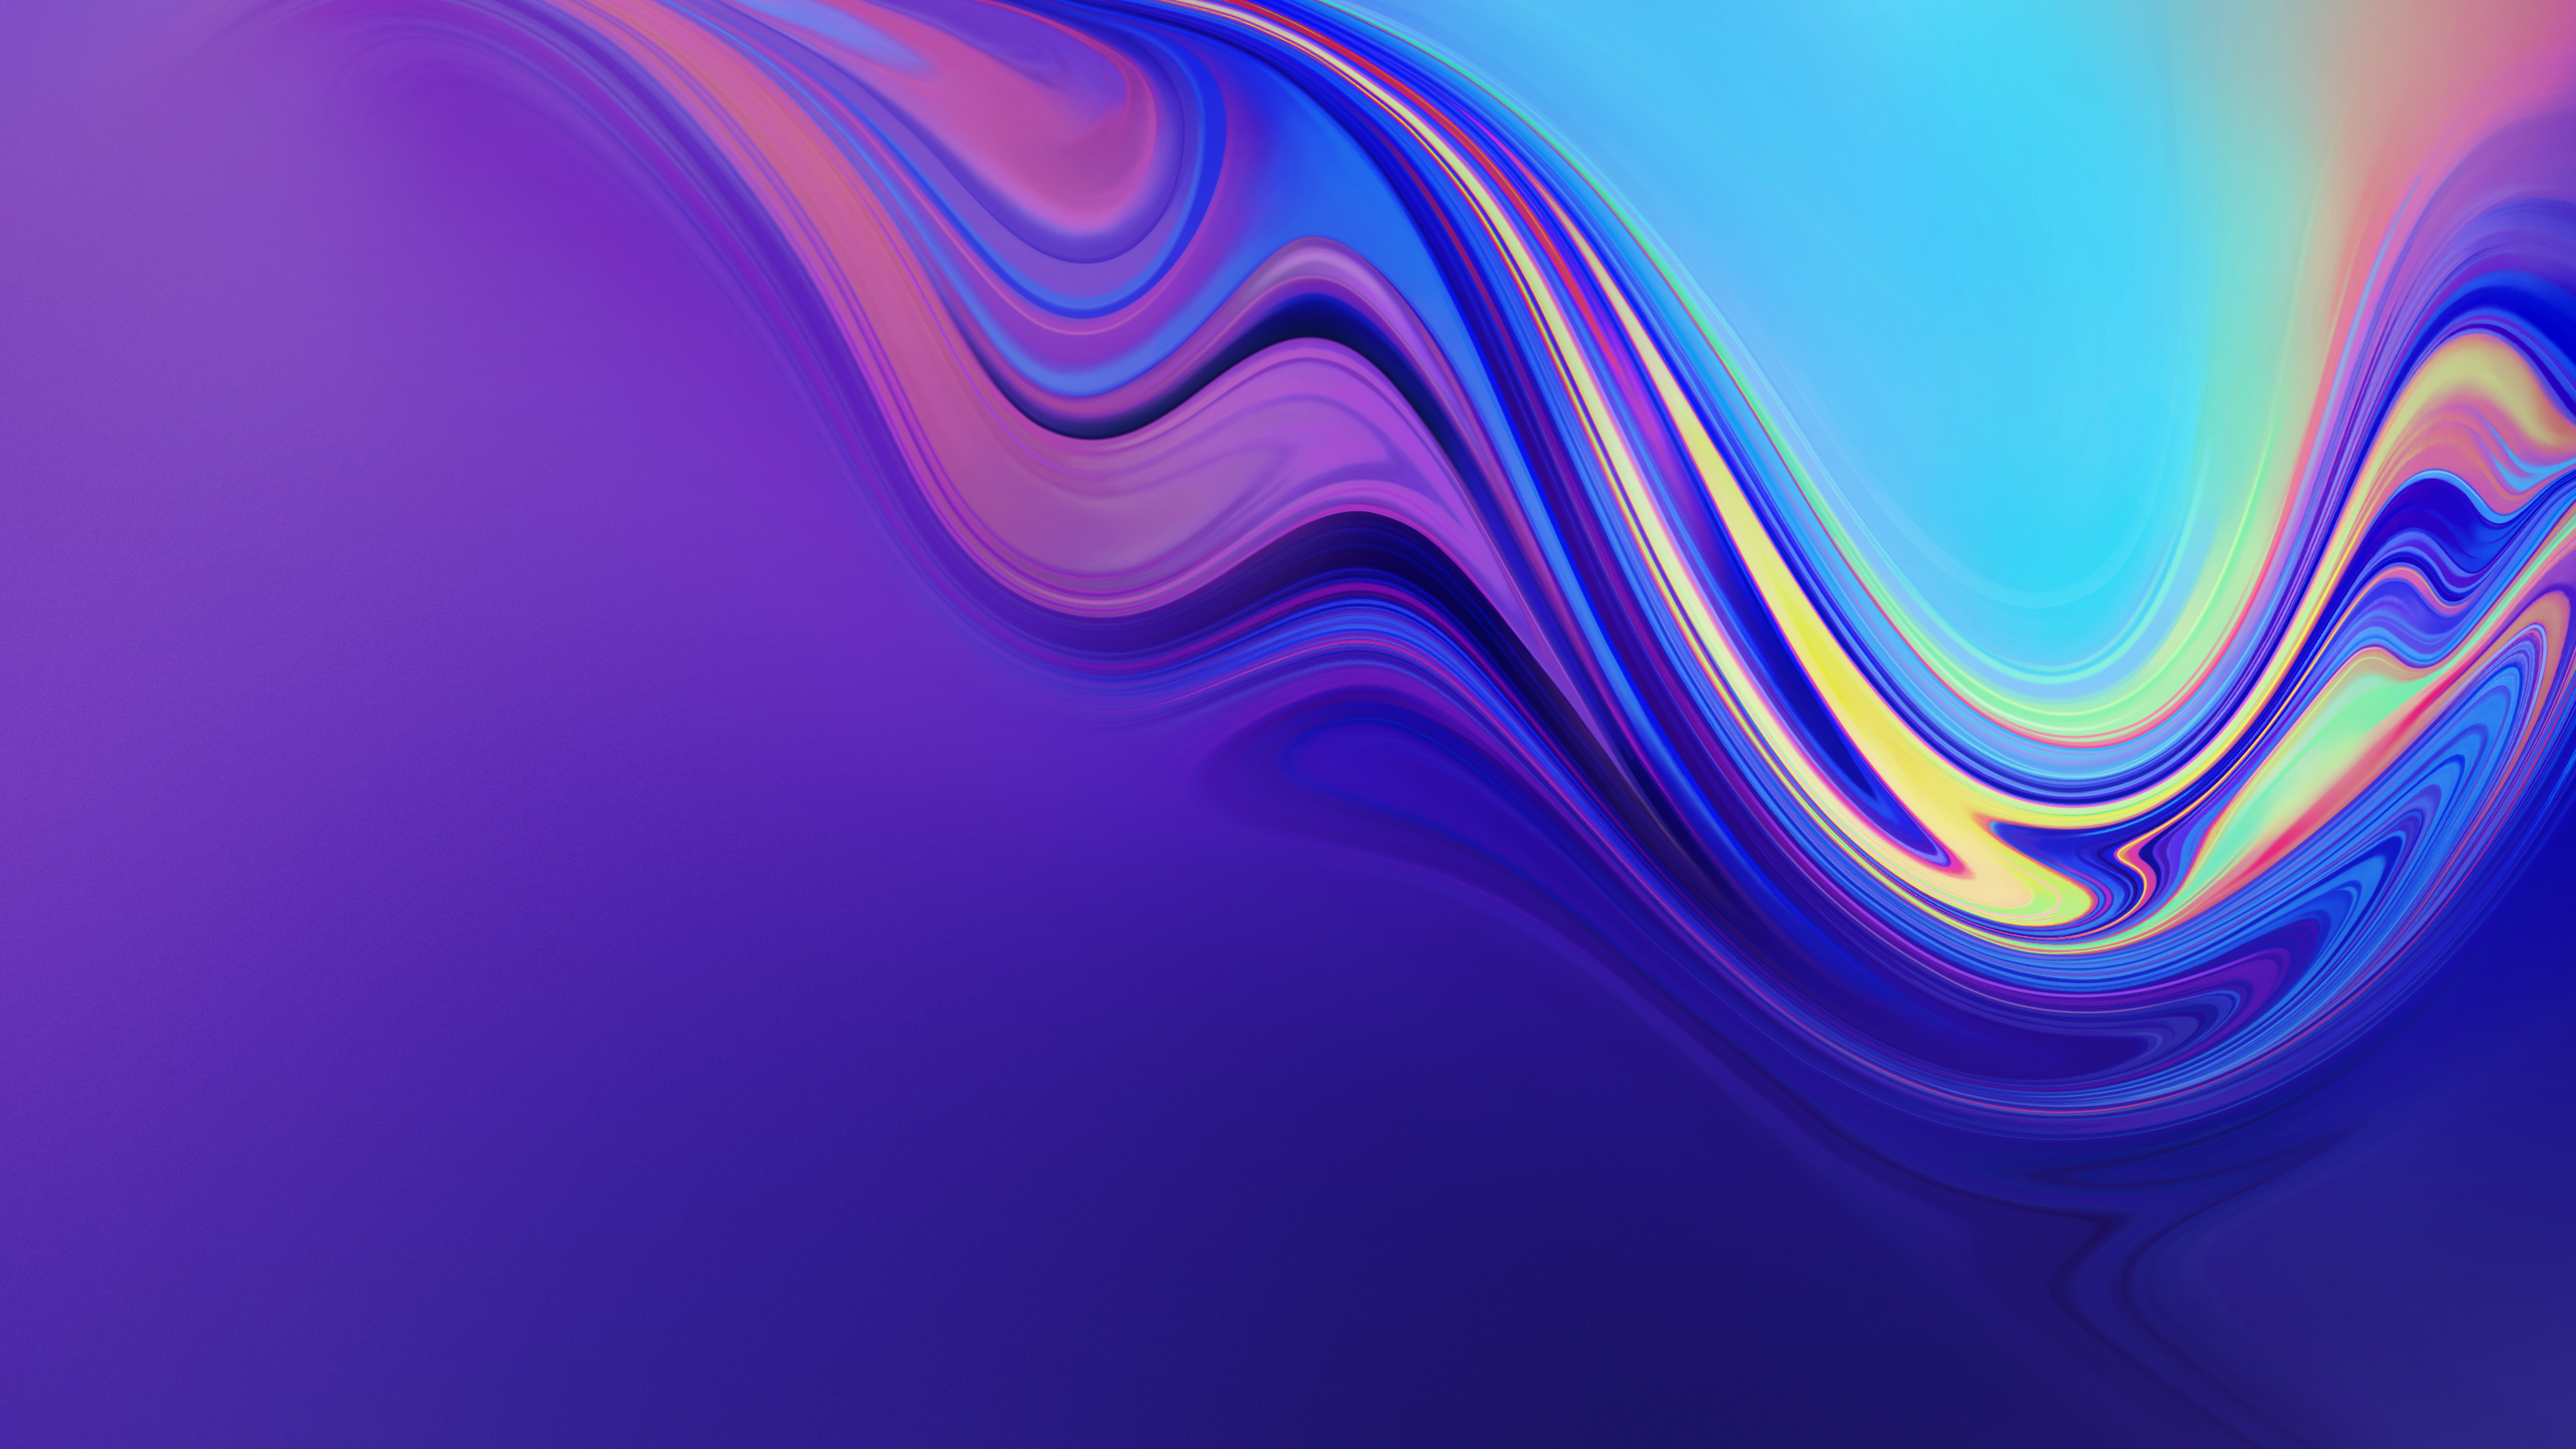 Here's the default wallpaper from the 2019 Notebook 9 Pro and Notebook 9 Pen up for downloading if you'd like. Link also in the comments. I posted this before a while ago